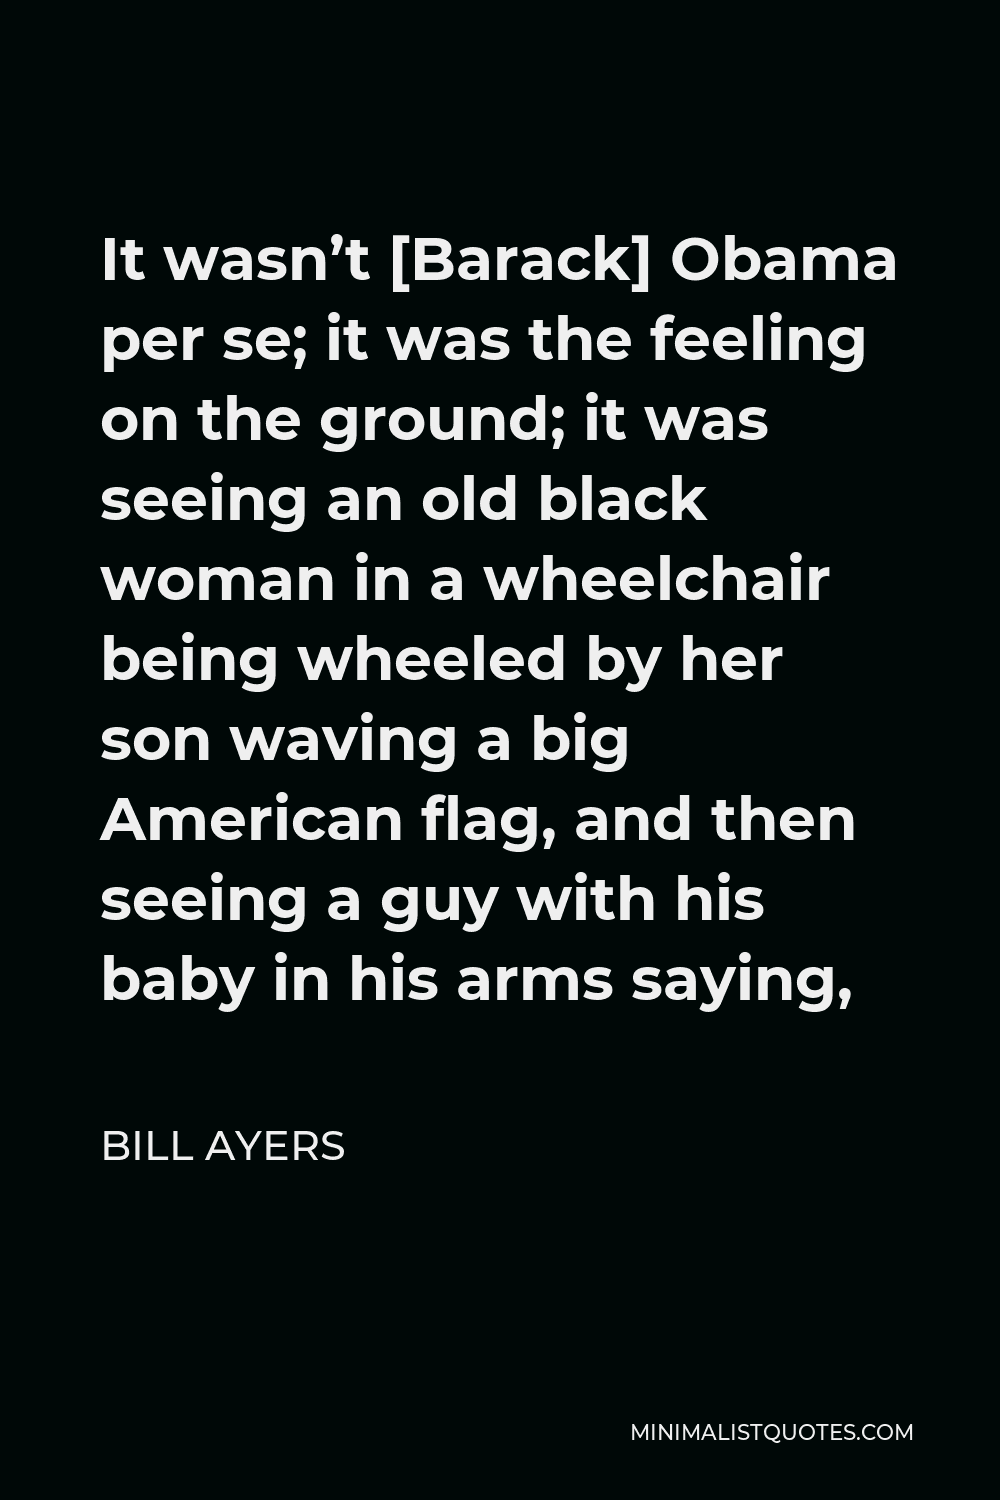 Bill Ayers Quote - It wasn’t [Barack] Obama per se; it was the feeling on the ground; it was seeing an old black woman in a wheelchair being wheeled by her son waving a big American flag, and then seeing a guy with his baby in his arms saying,